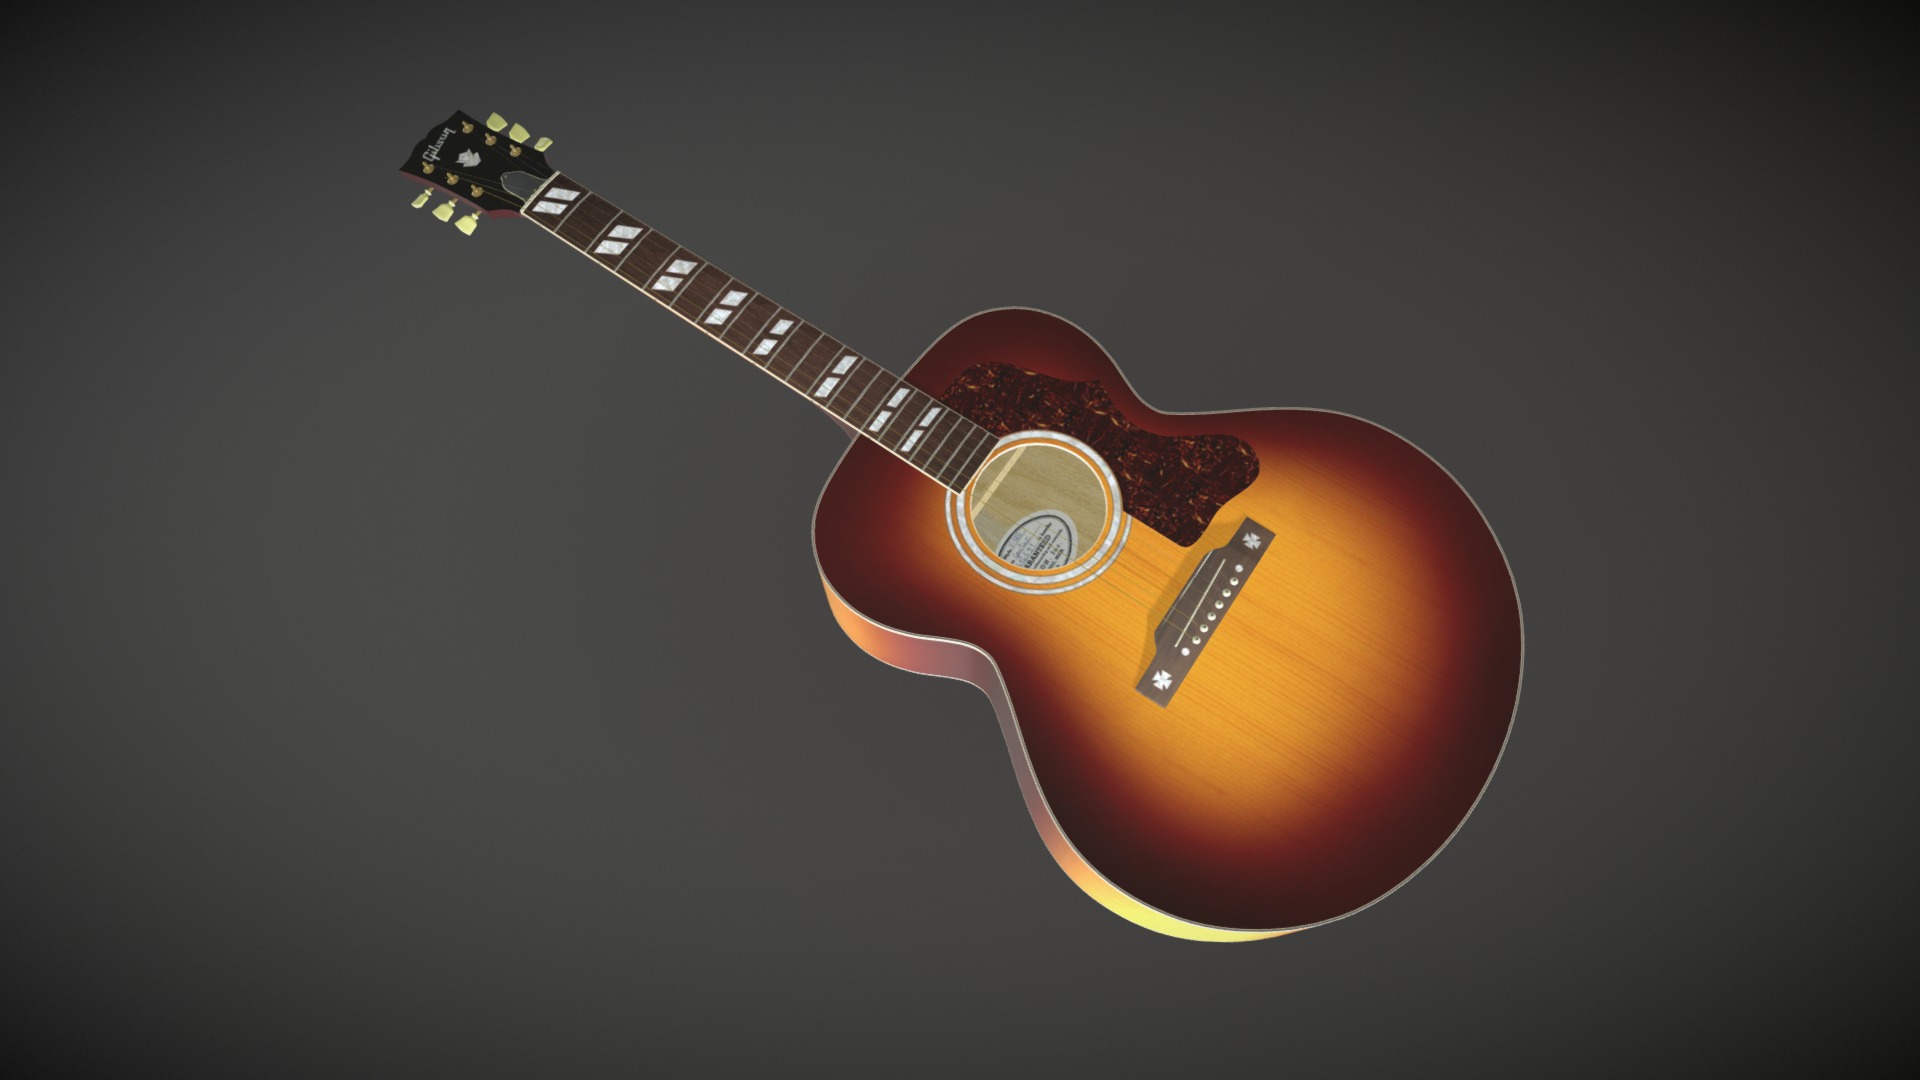 3D model Gibson J-185 Acoustic Guitar - This is a 3D model of the Gibson J-185 Acoustic Guitar. The 3D model is about a guitar on a black background.